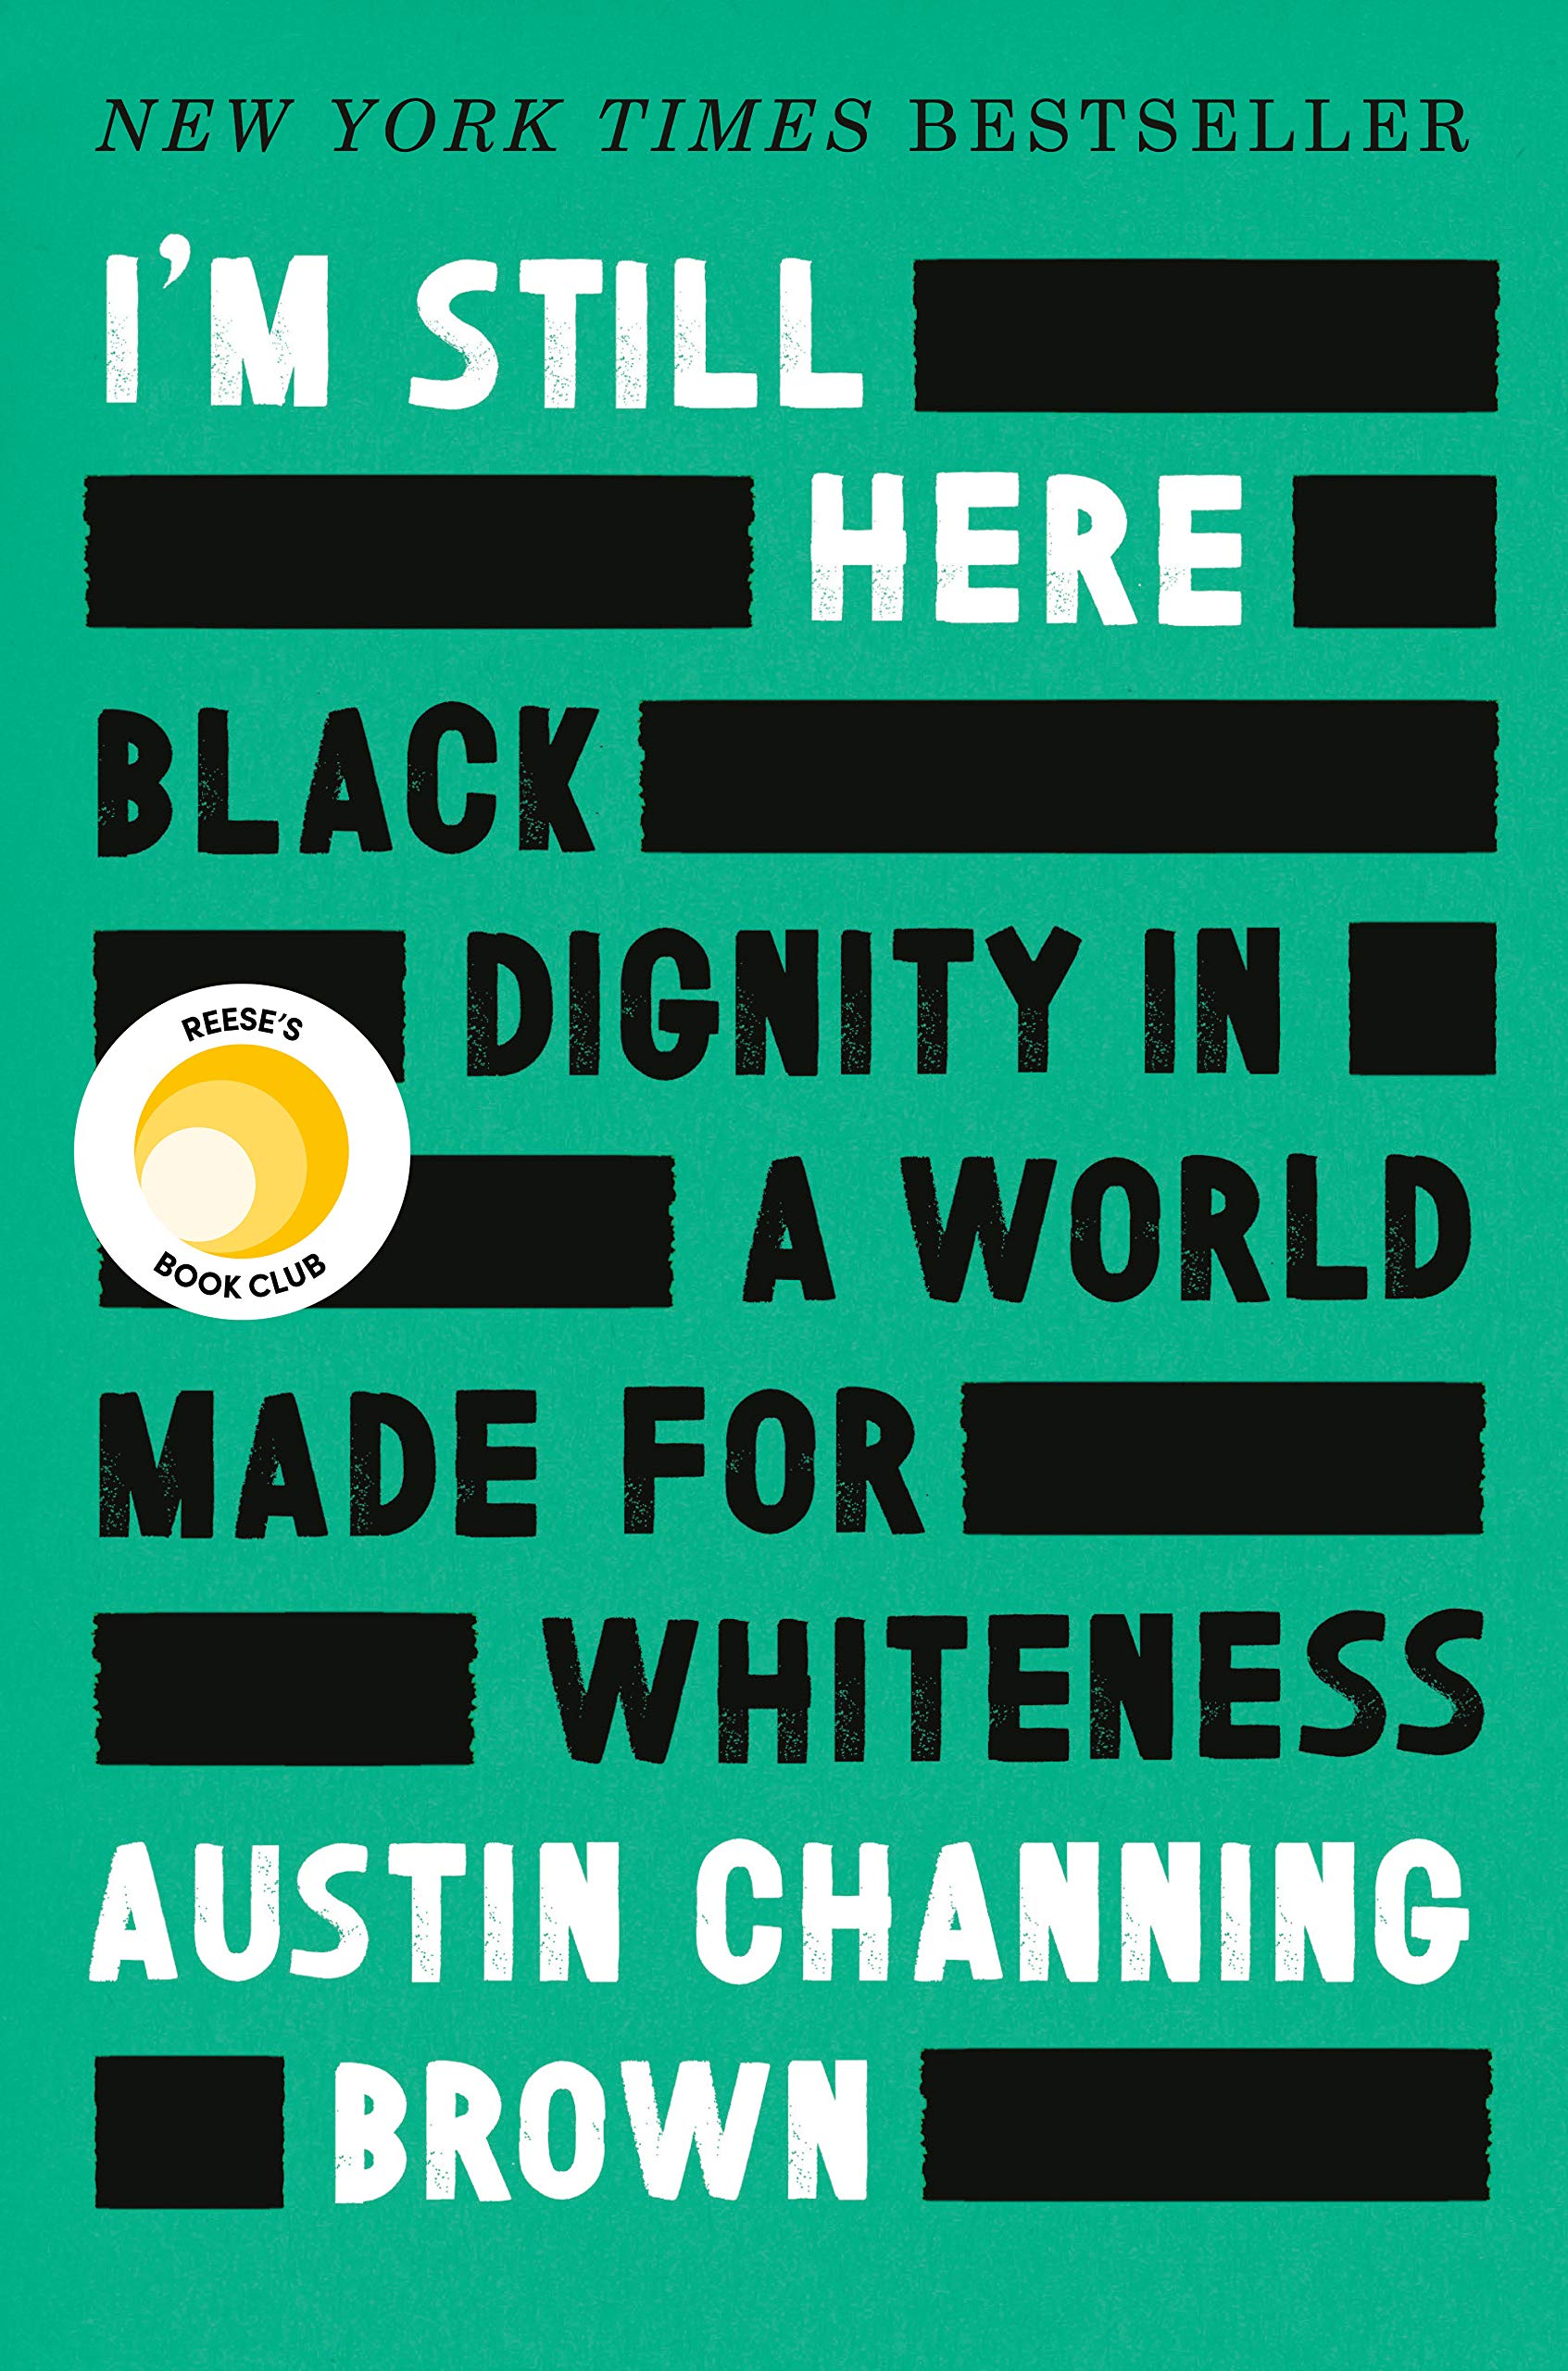 I'm Still Here: Black Dignity in a World Made for Whiteness Hardcover by Austin Channing Brown